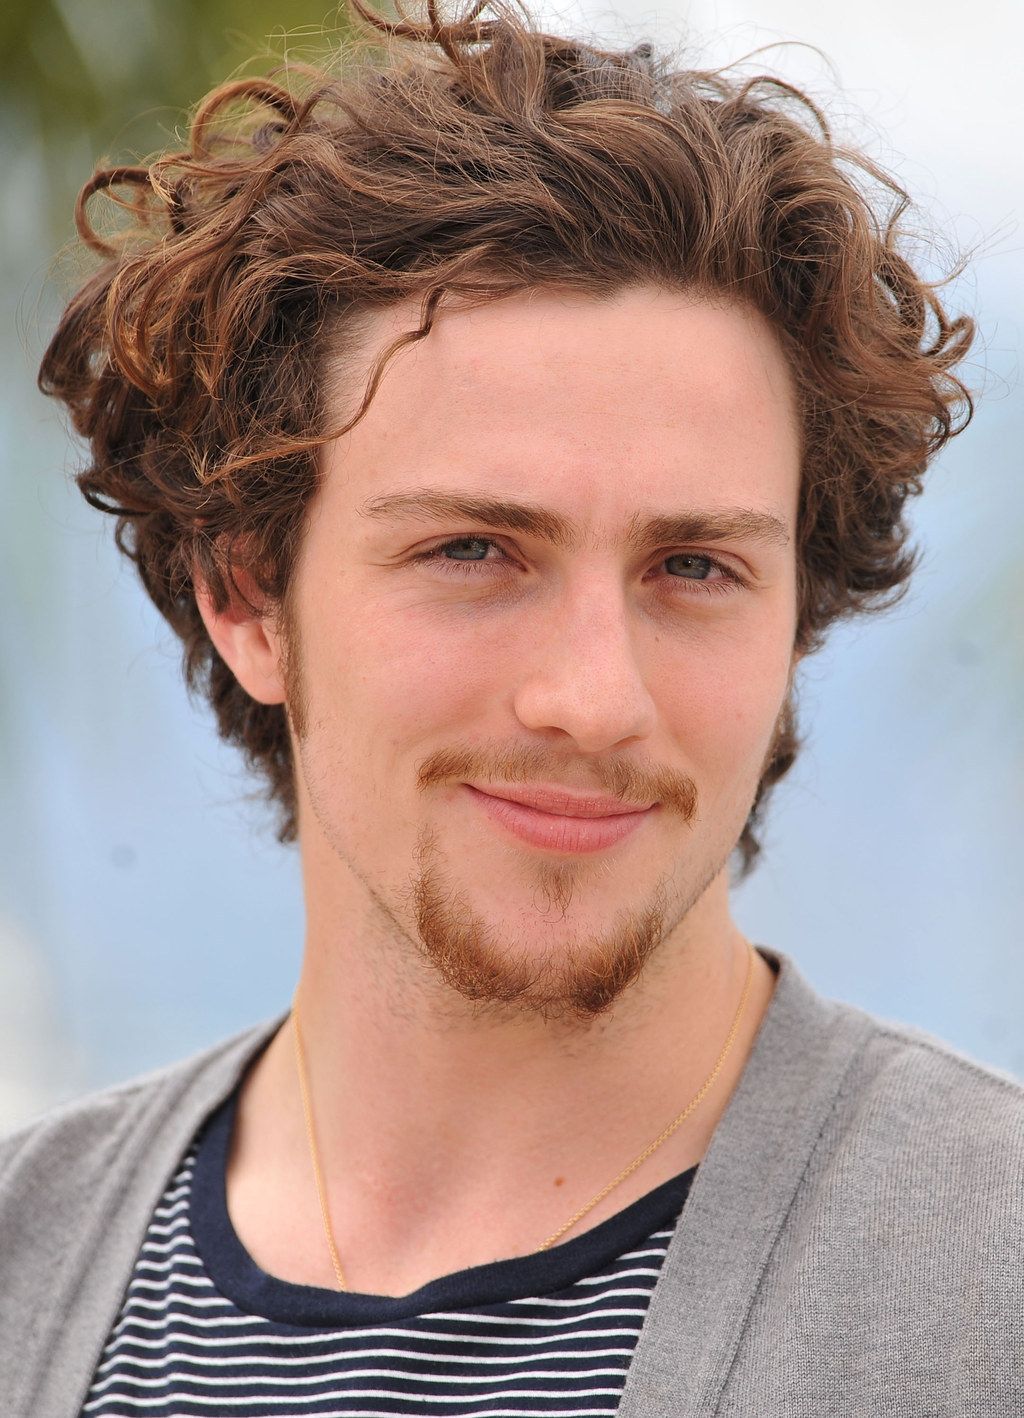 Let's Take In Aaron Taylor-Johnson's Transformation Into Mega Hot Dude